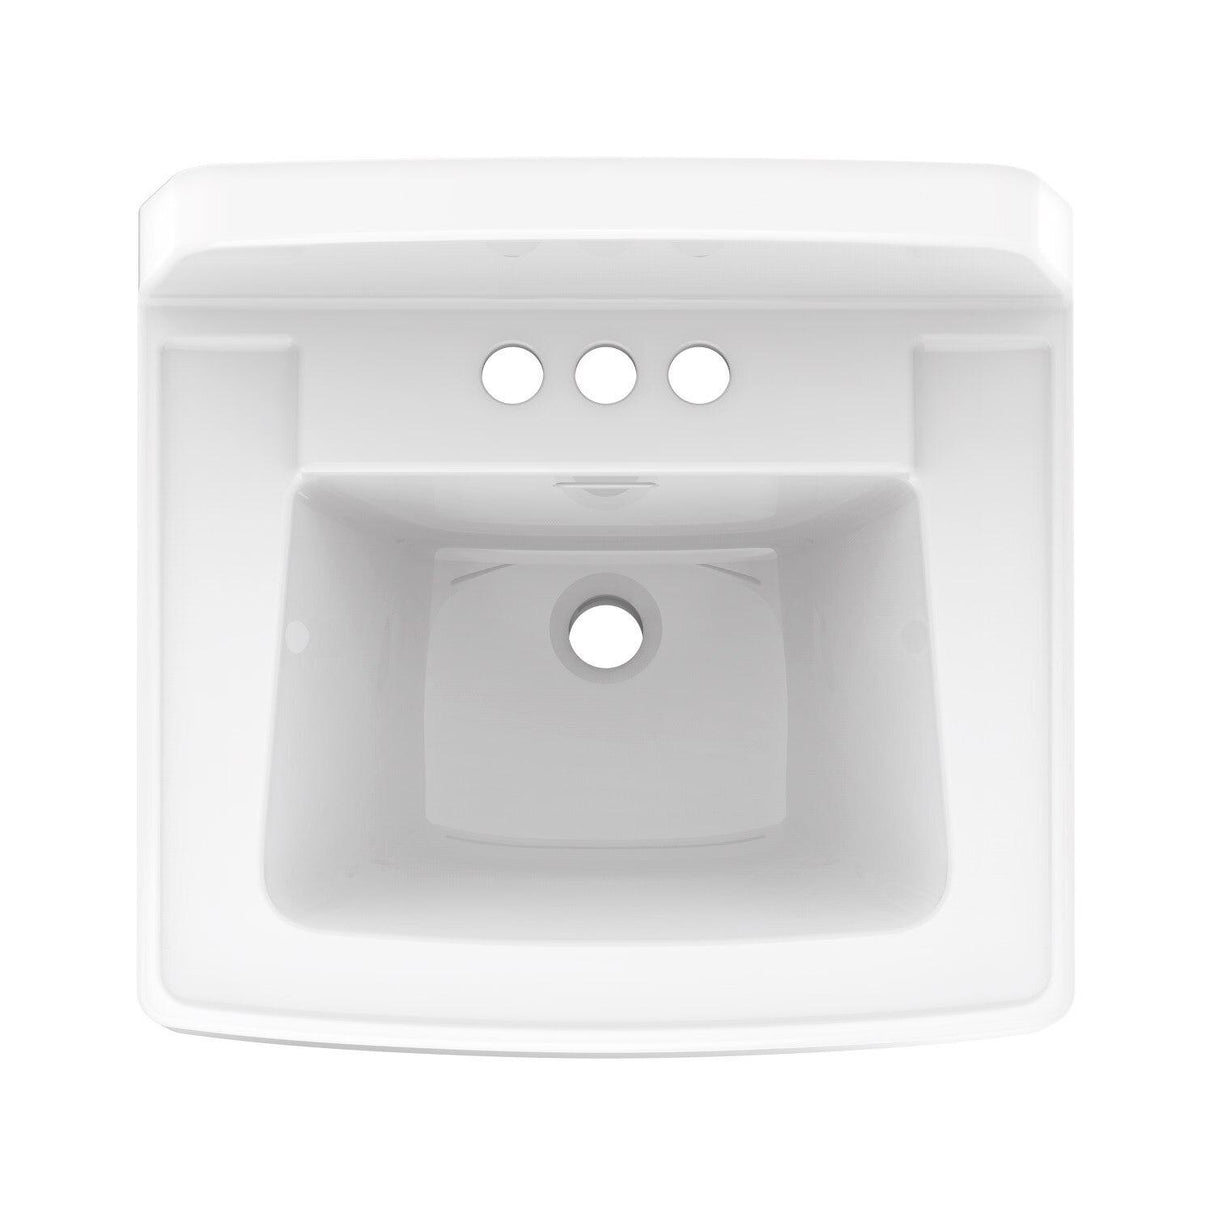 Gerber G0012654 White Monticello II 4" Centers Wall Hung Bathroom Sink